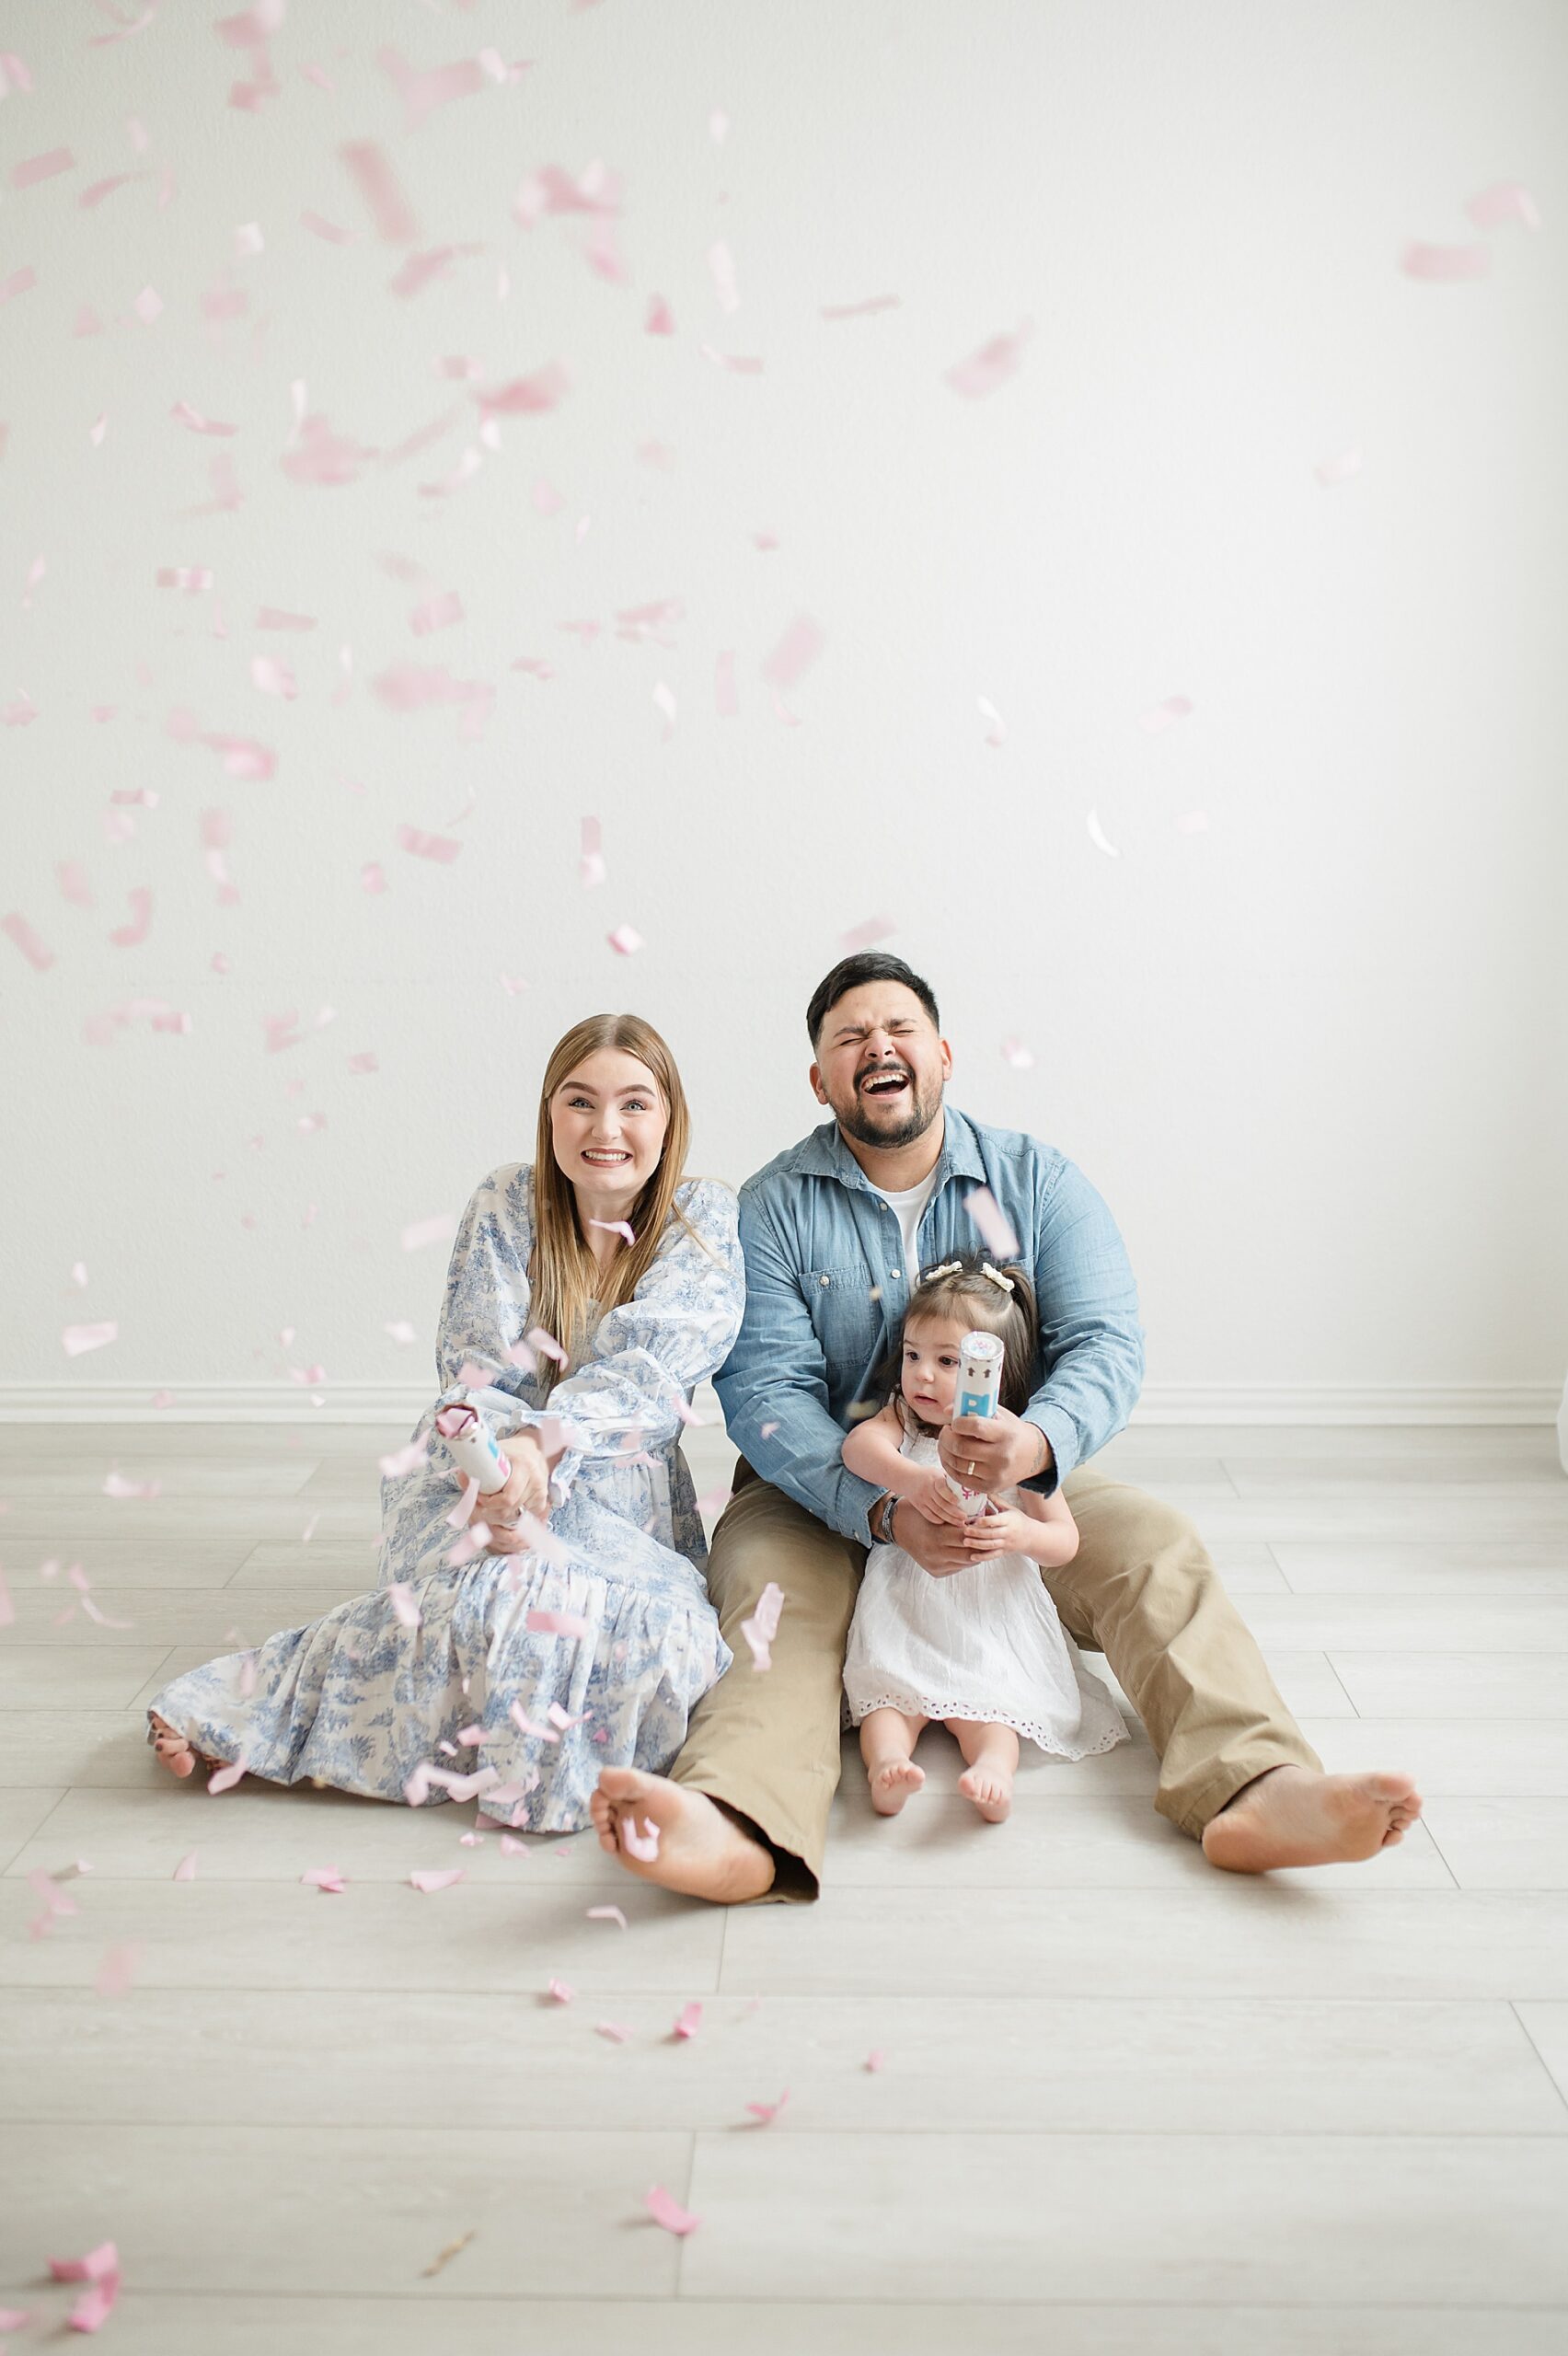 Gender reveal with popper and confetti 5 Benefits of Gender Reveal Sessions photographed by Lindsey Dutton Photography, a Dallas Maternity photographer